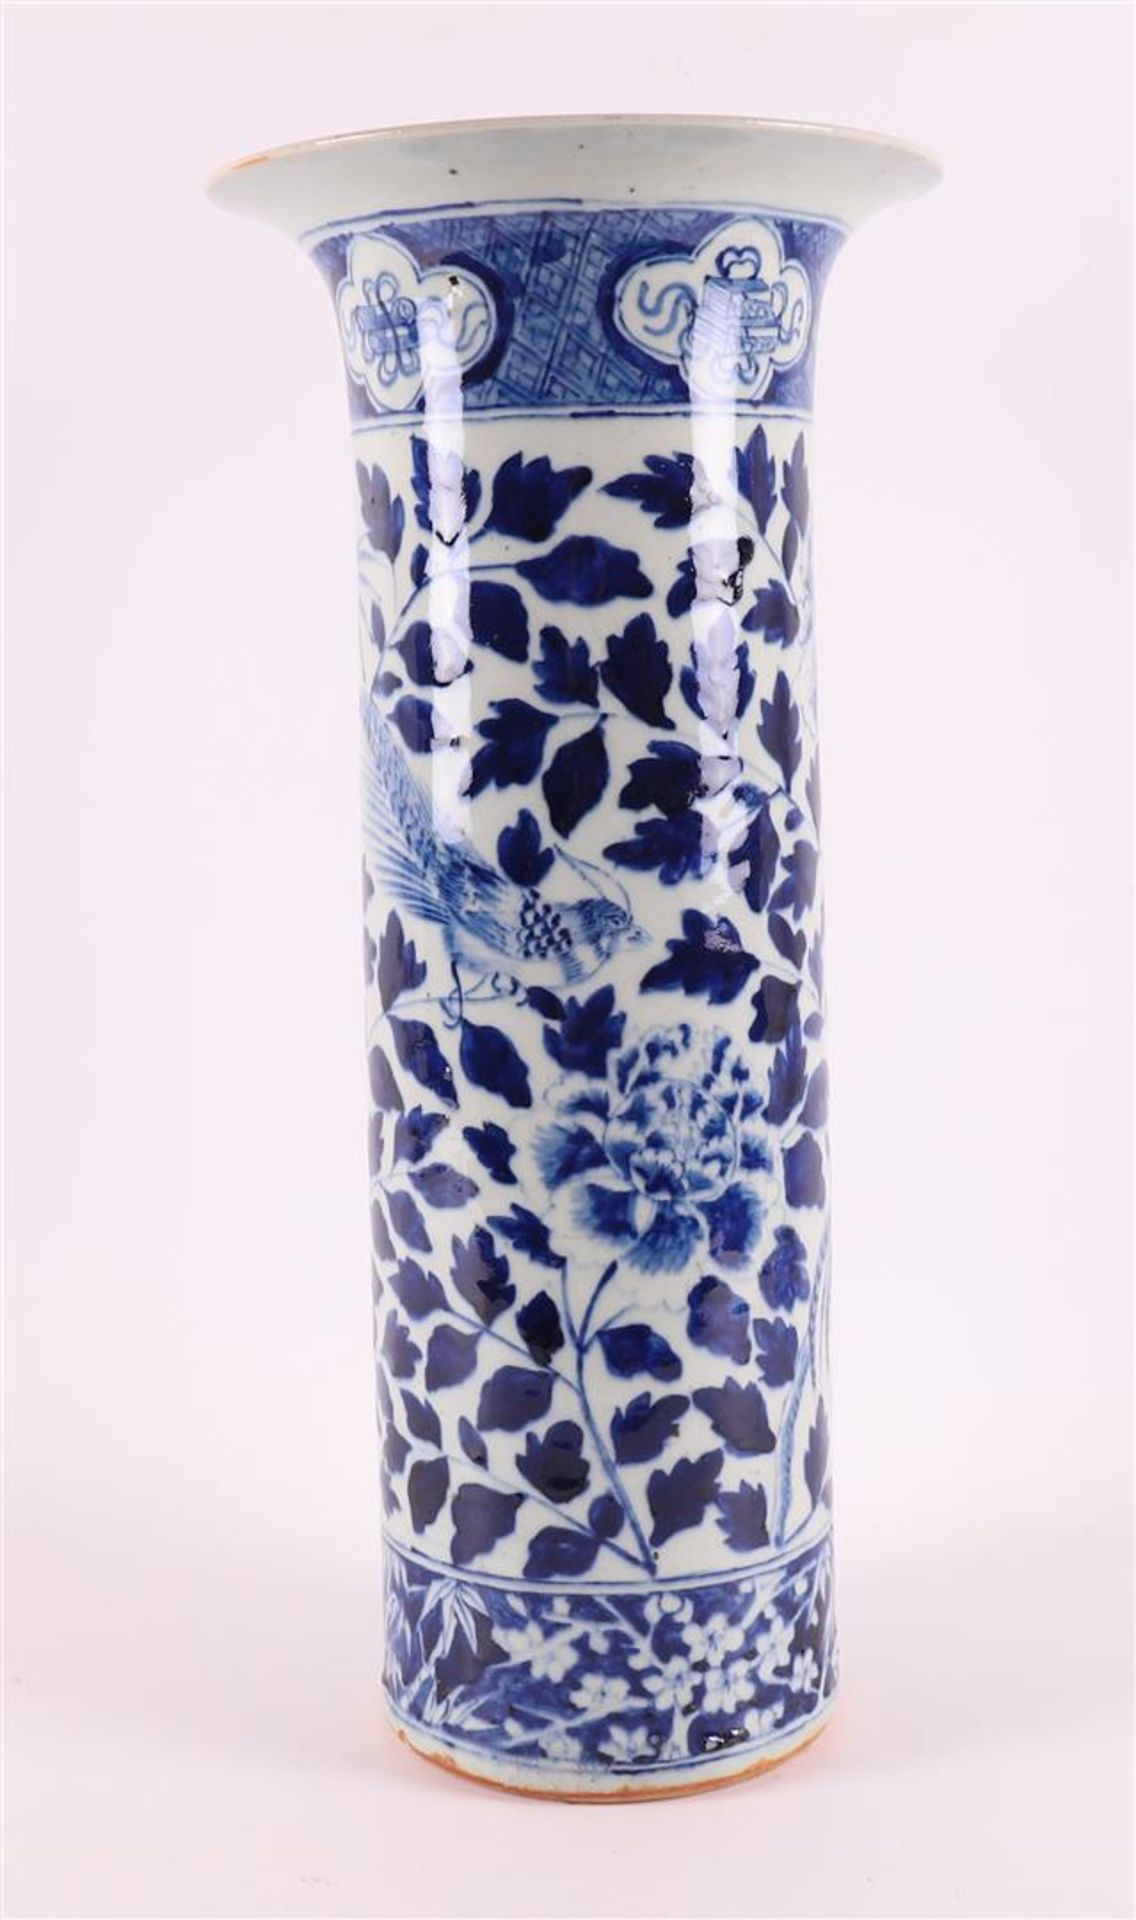 A cylindrical blue and white porcelain trumpet vase, China, 19th century. Blue underglaze floral